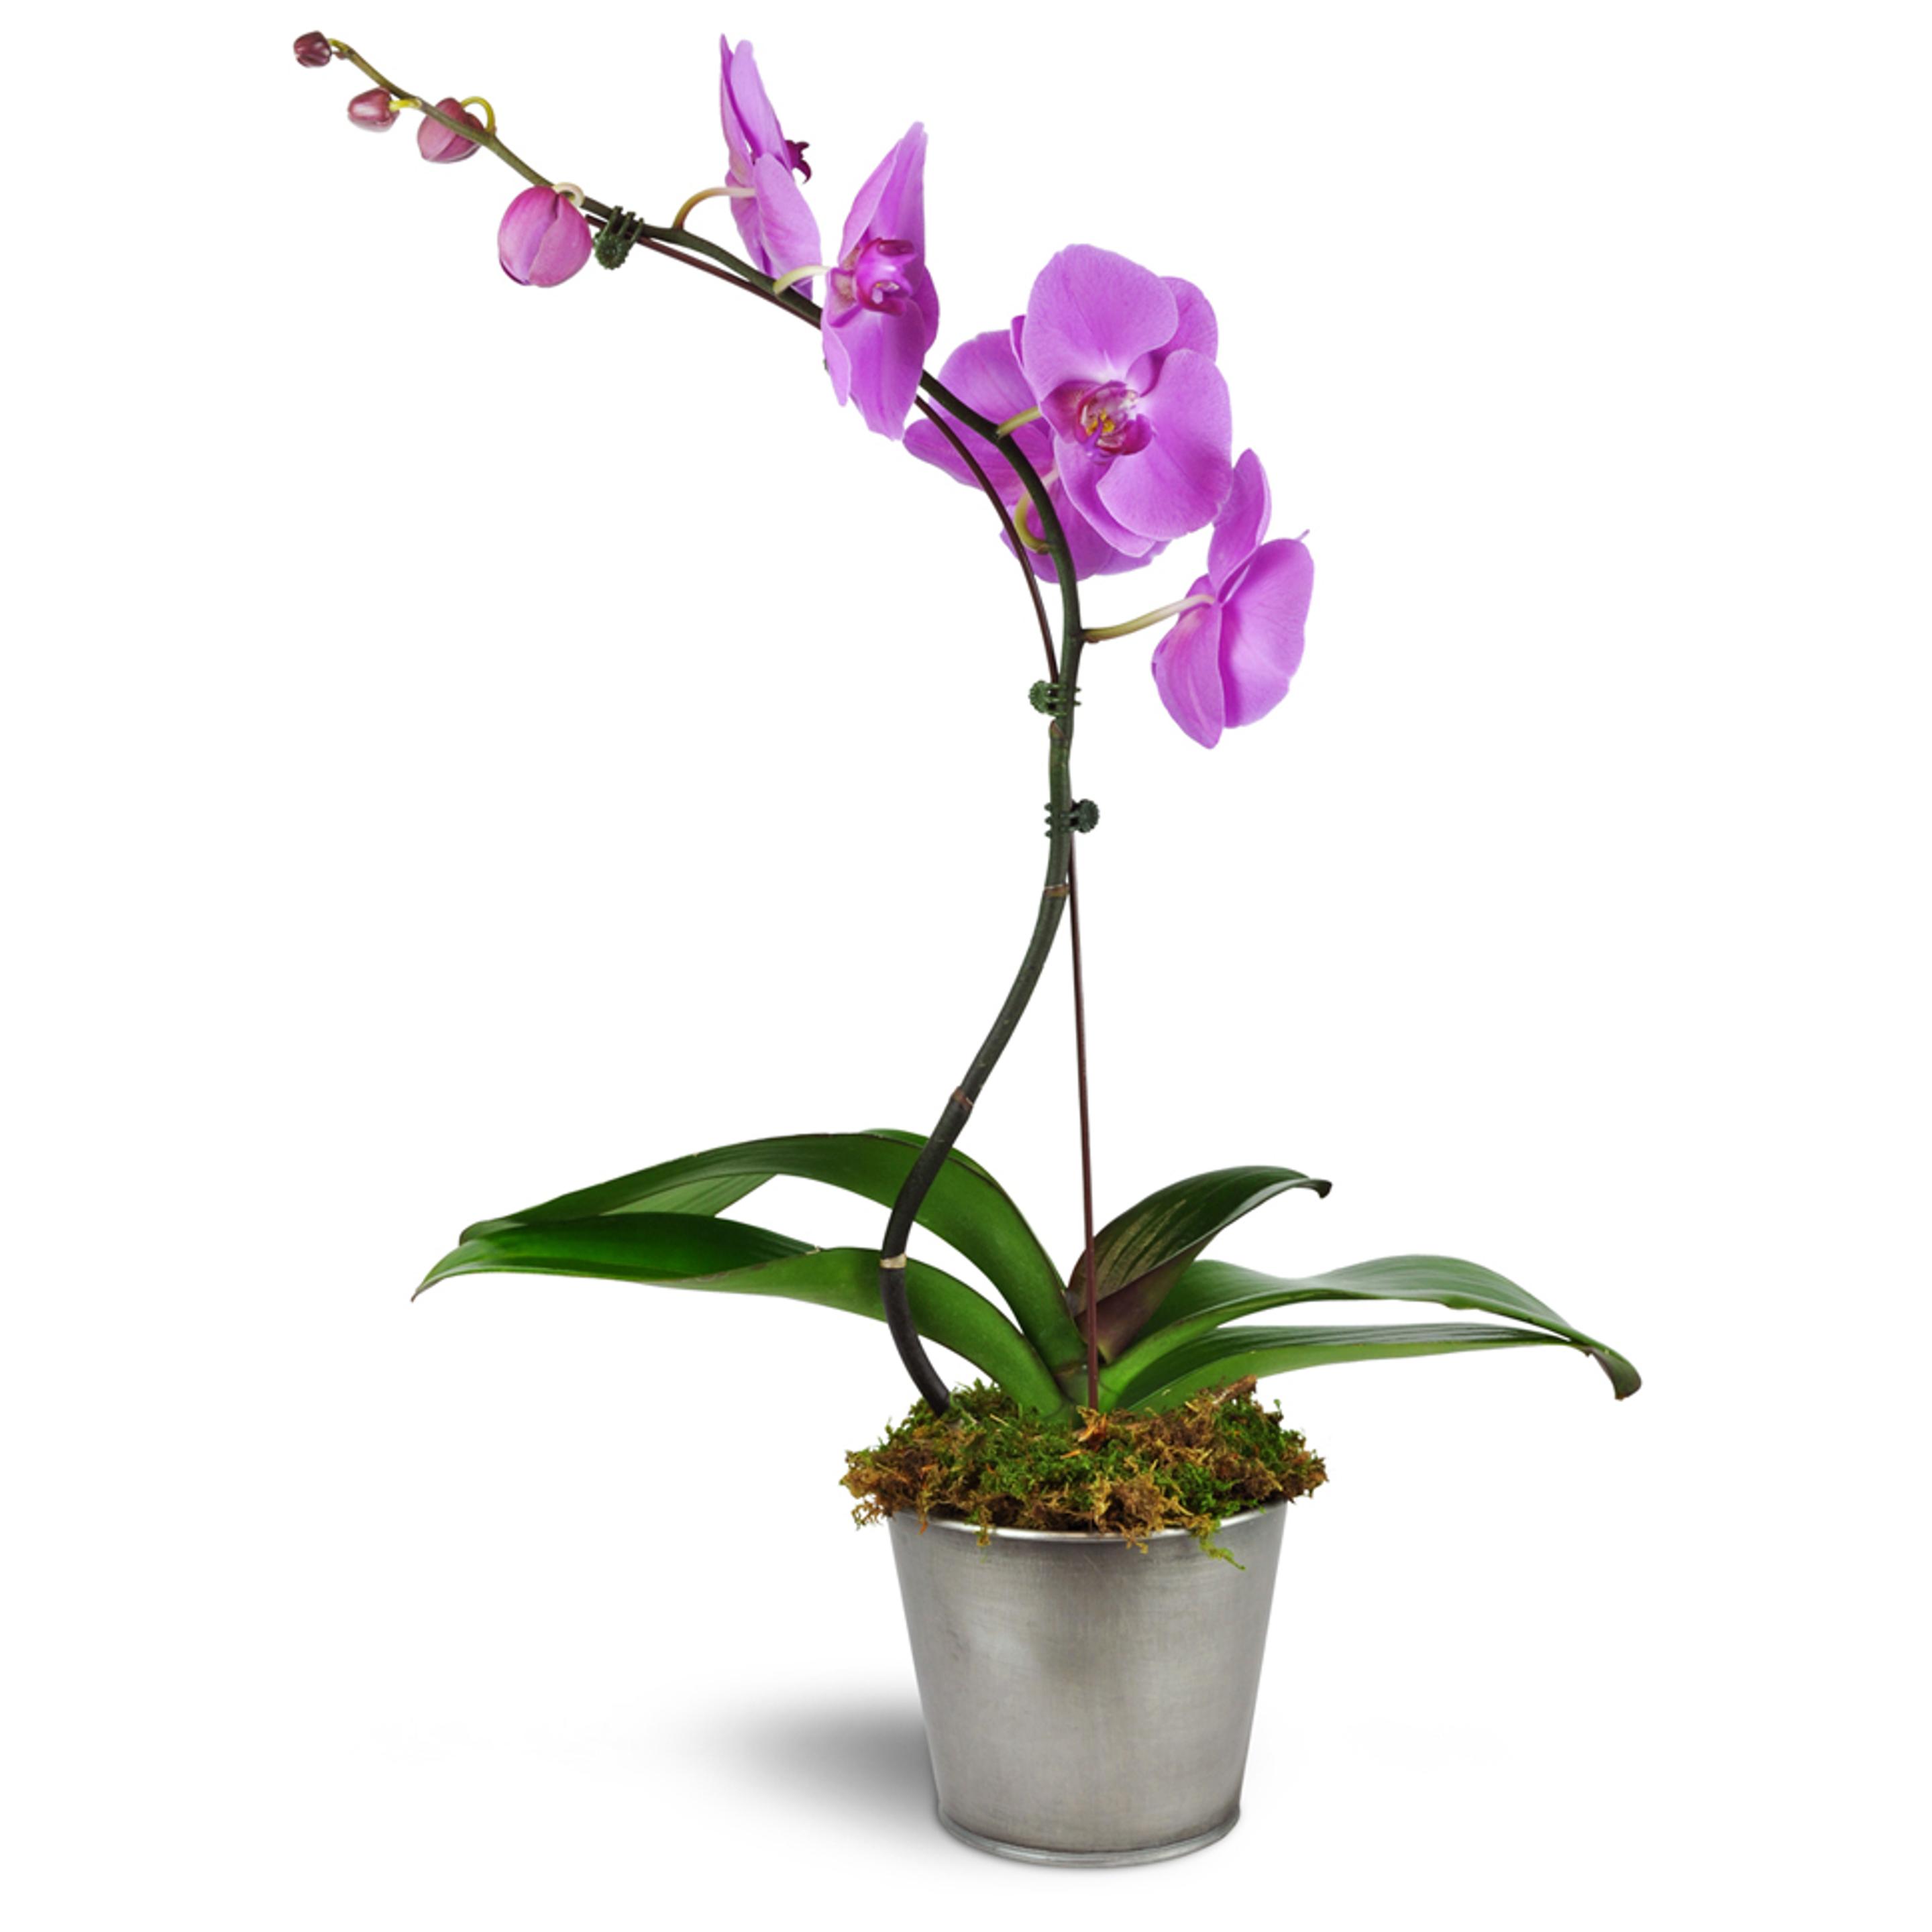 Single pink orchid in a pot